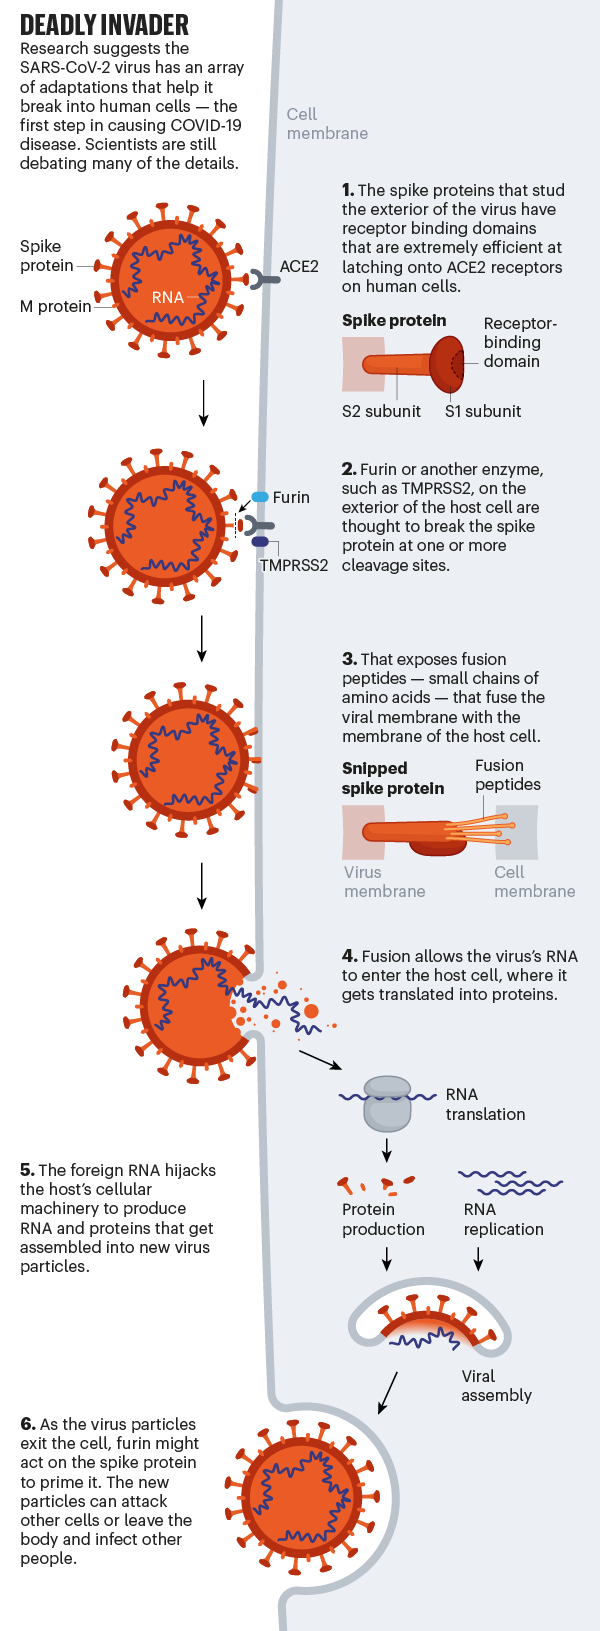 Profile of a killer the complex biology powering the coronavirus ...